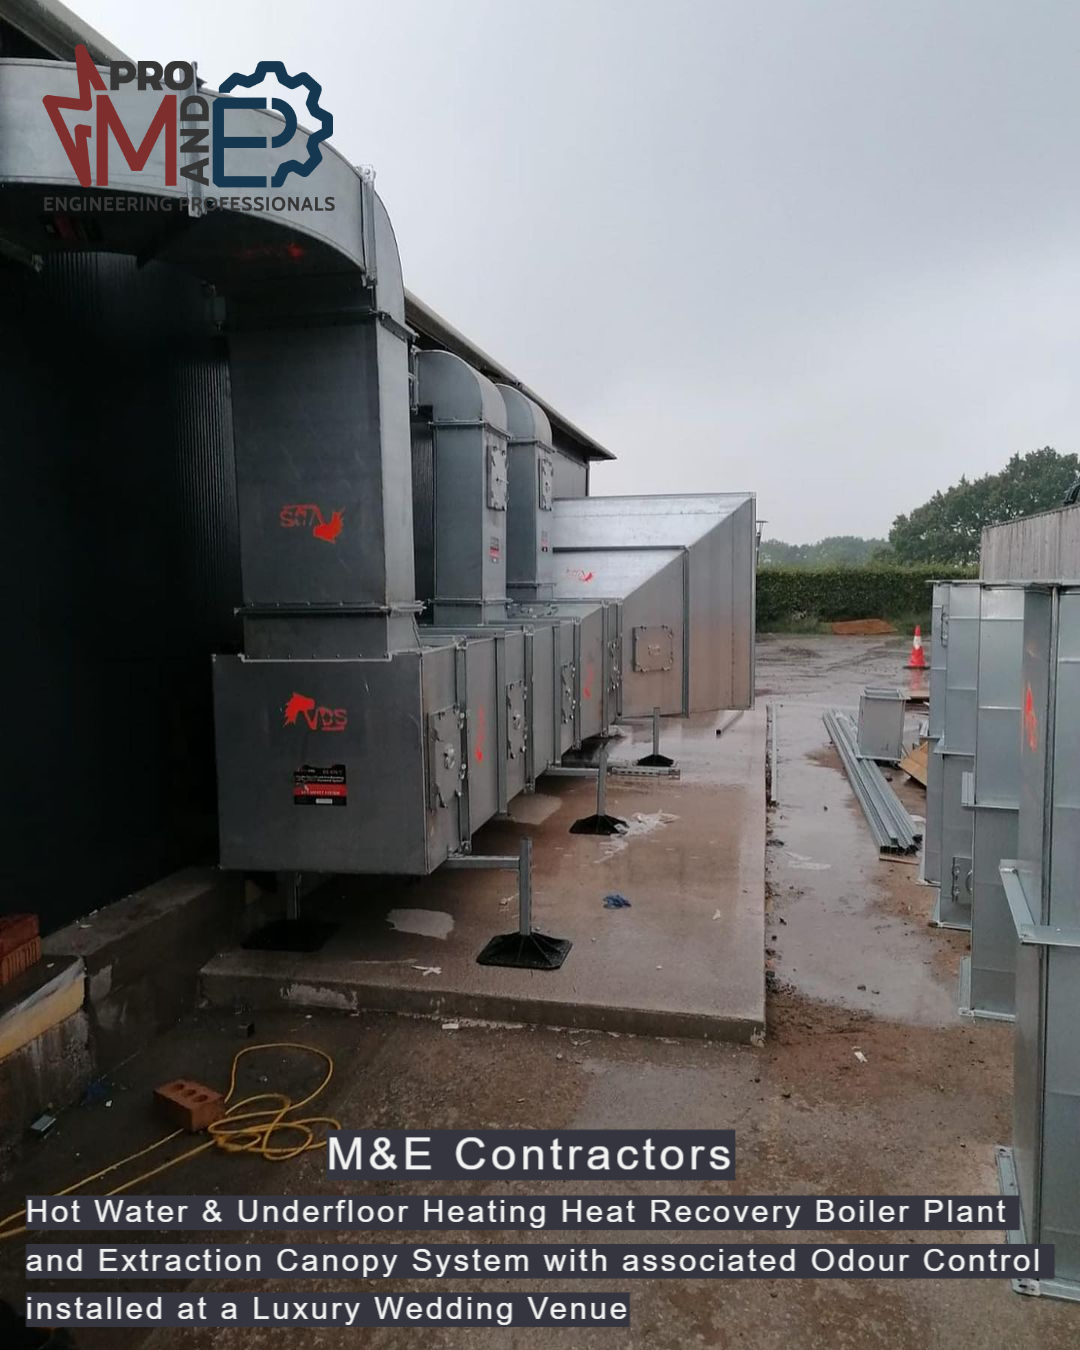 Hot Water & Underfloor Heating Heat Recovery Boiler Plant and Extraction Canopy System with associated Odour Control project at a Luxury Wedding Venue - M&E Pro